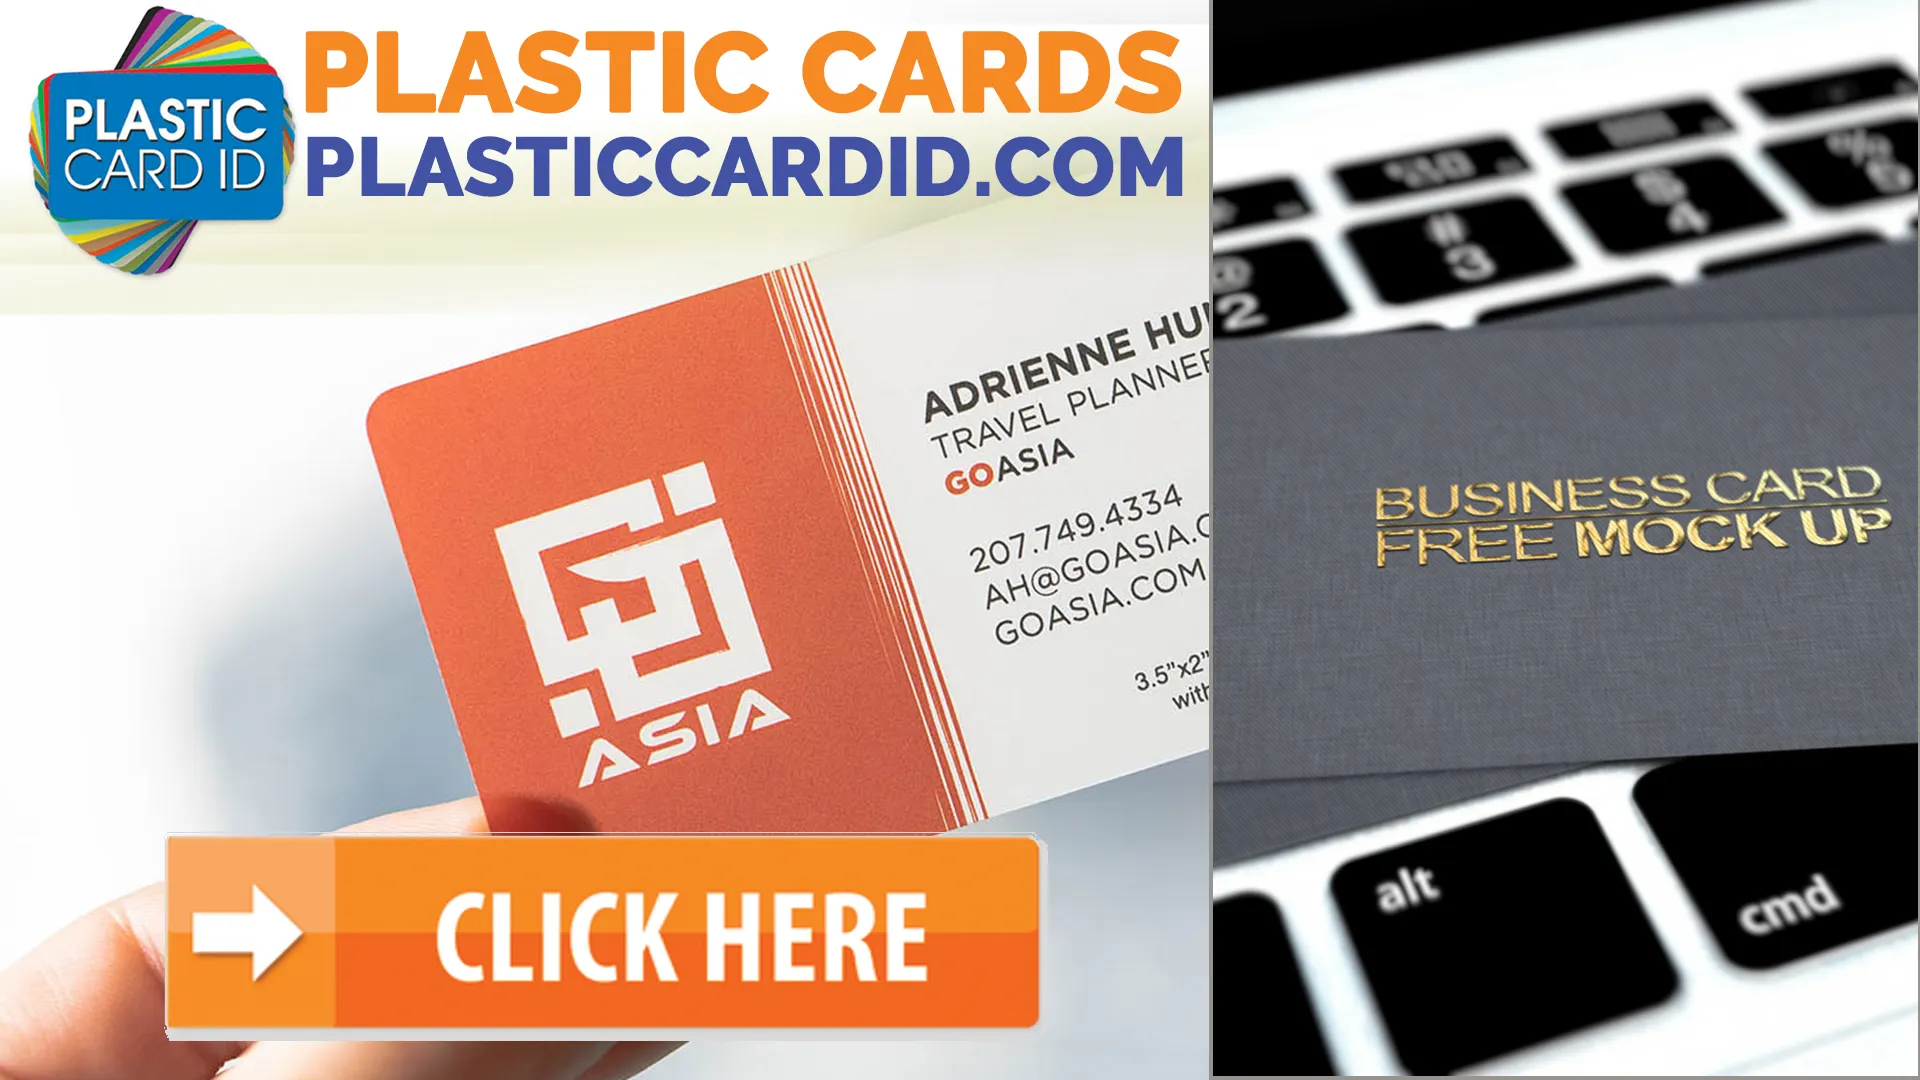 Our Comprehensive Range of Plastic Card Types